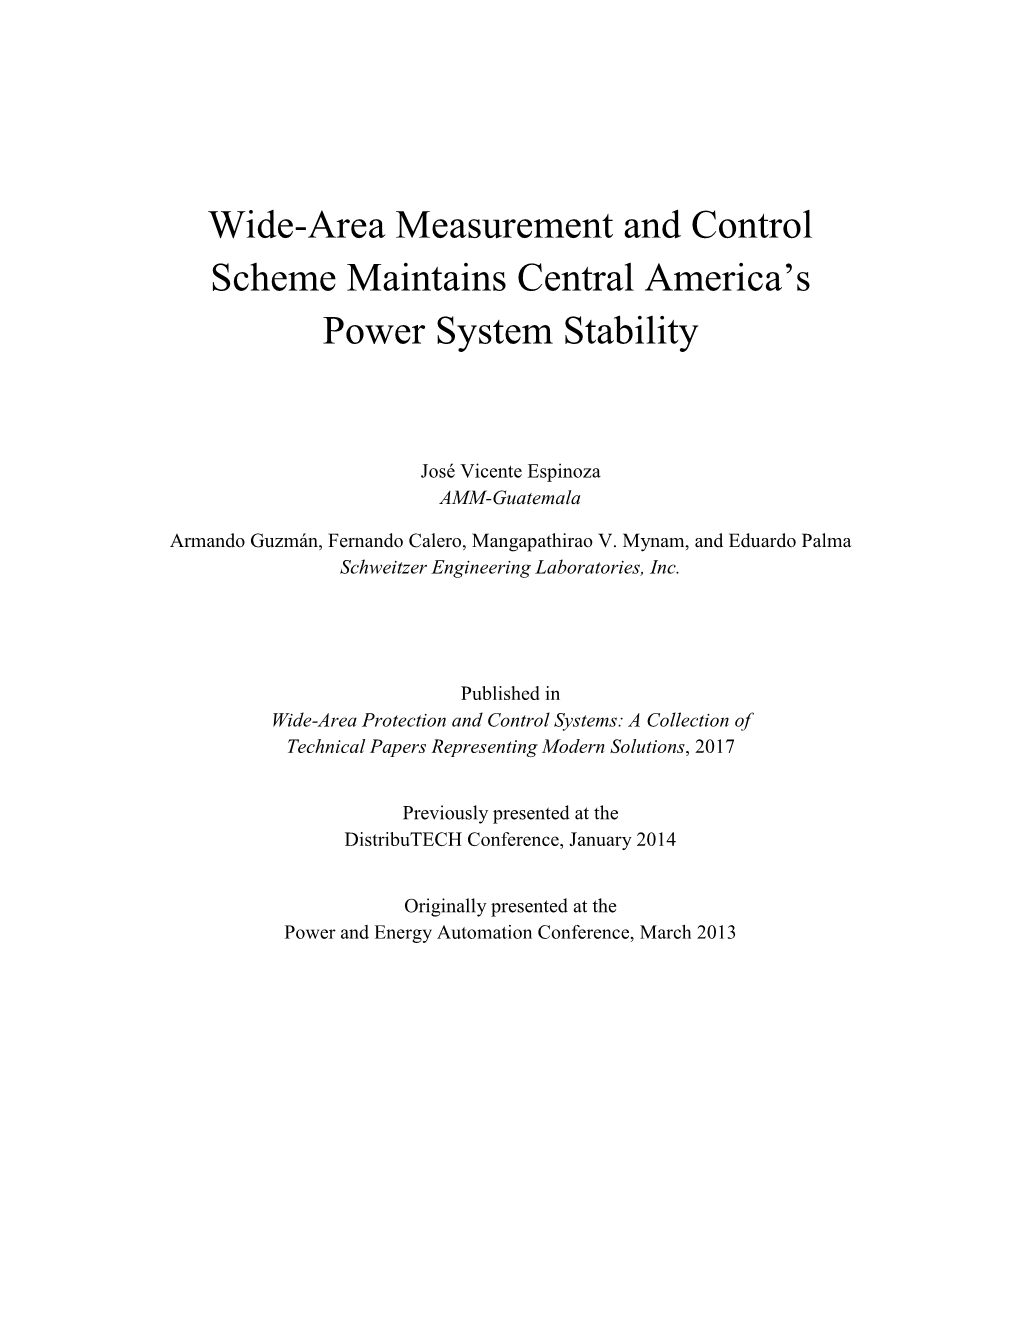 Wide-Area Measurement and Control Scheme Maintains Central America’S Power System Stability